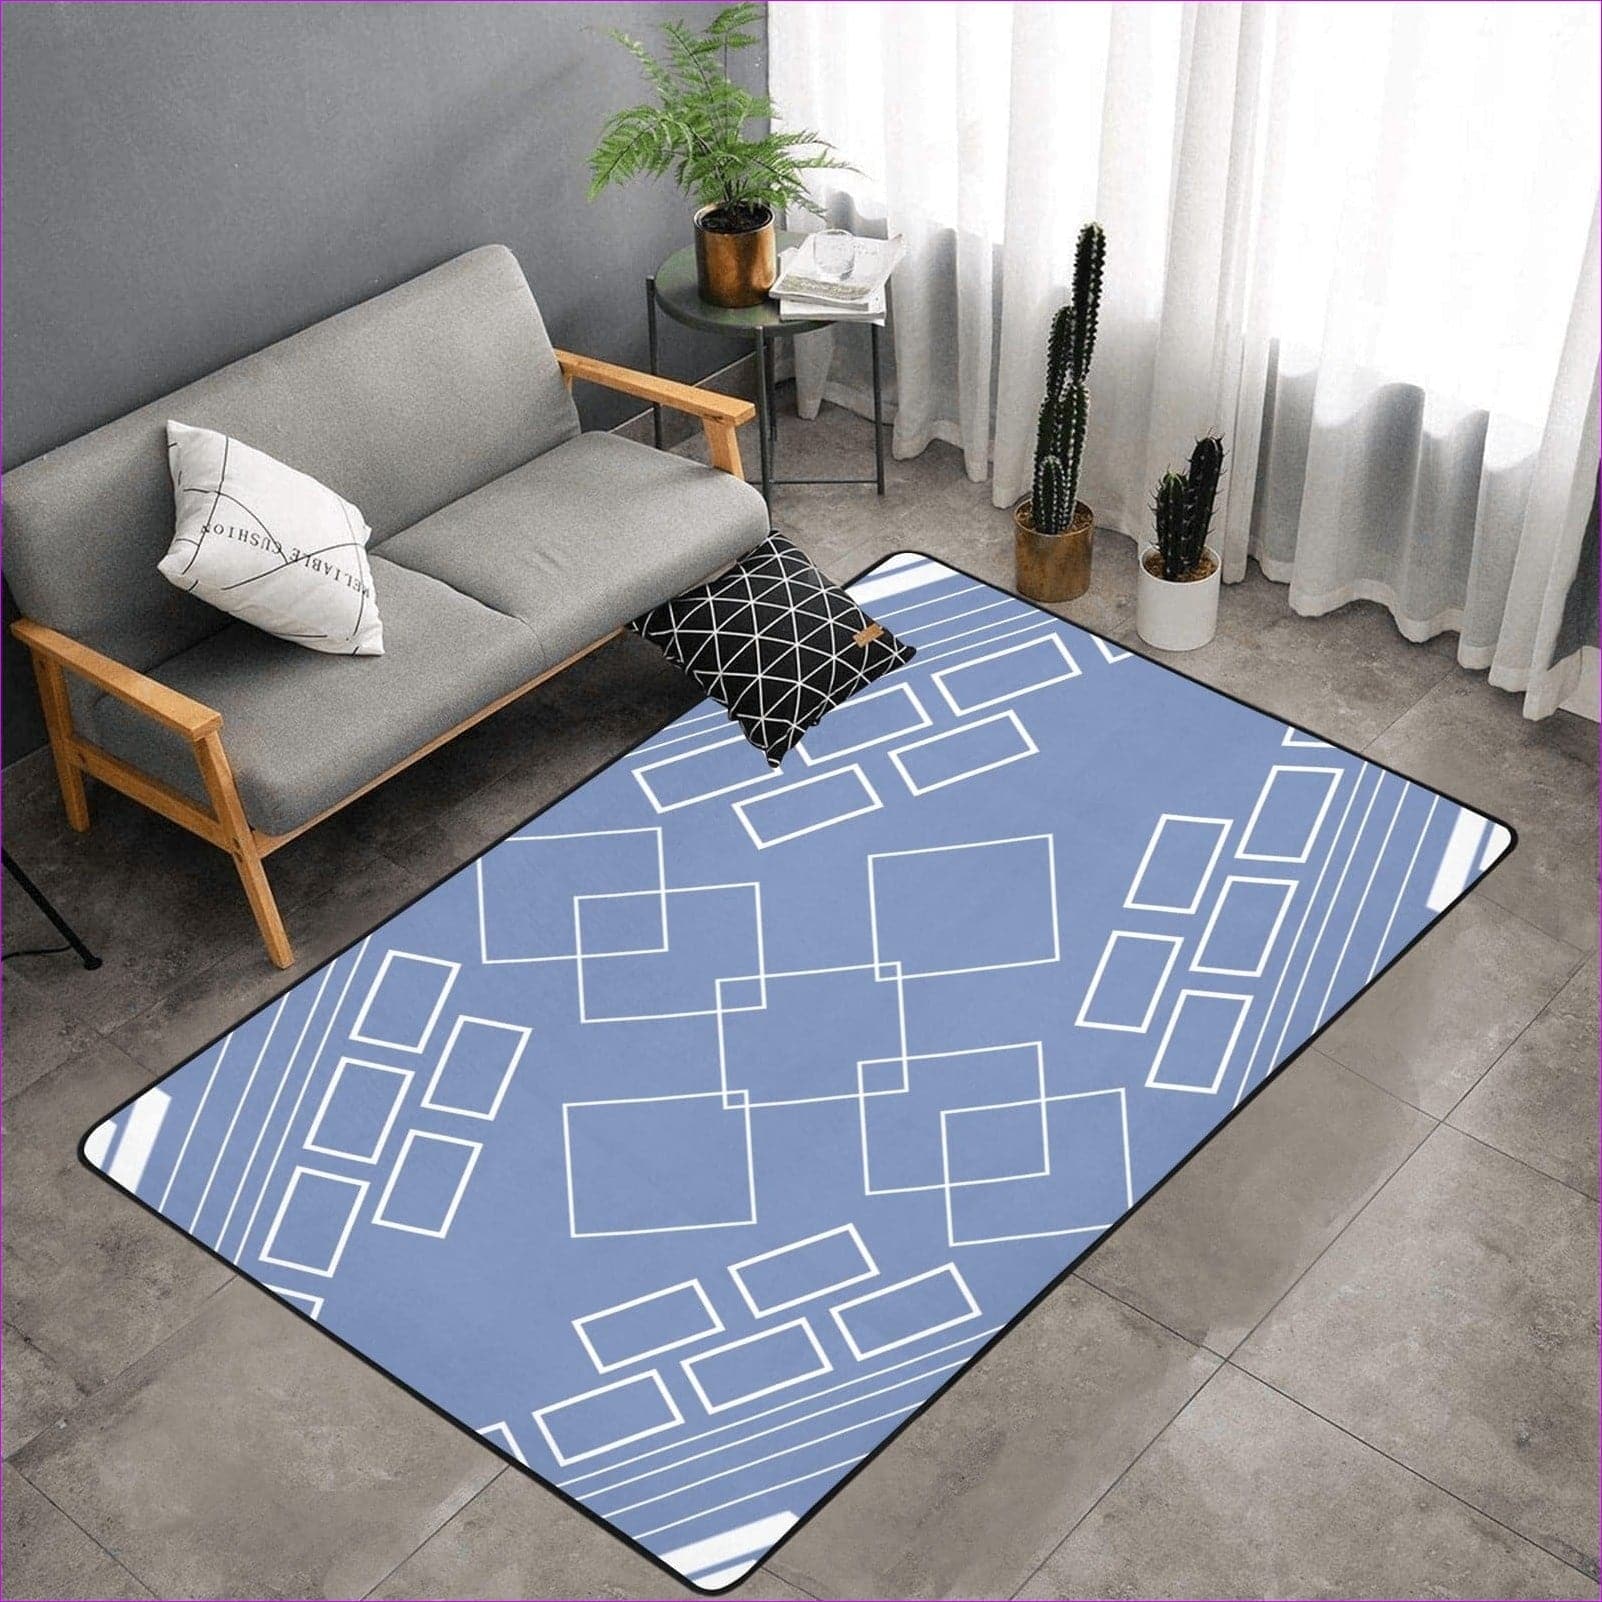 One Size shaped out -steal blue Area Rug with Black Binding 7'x5' - Shaped Out Area Rug with Black Binding 7'x5' (3 colors) - area rug at TFC&H Co.